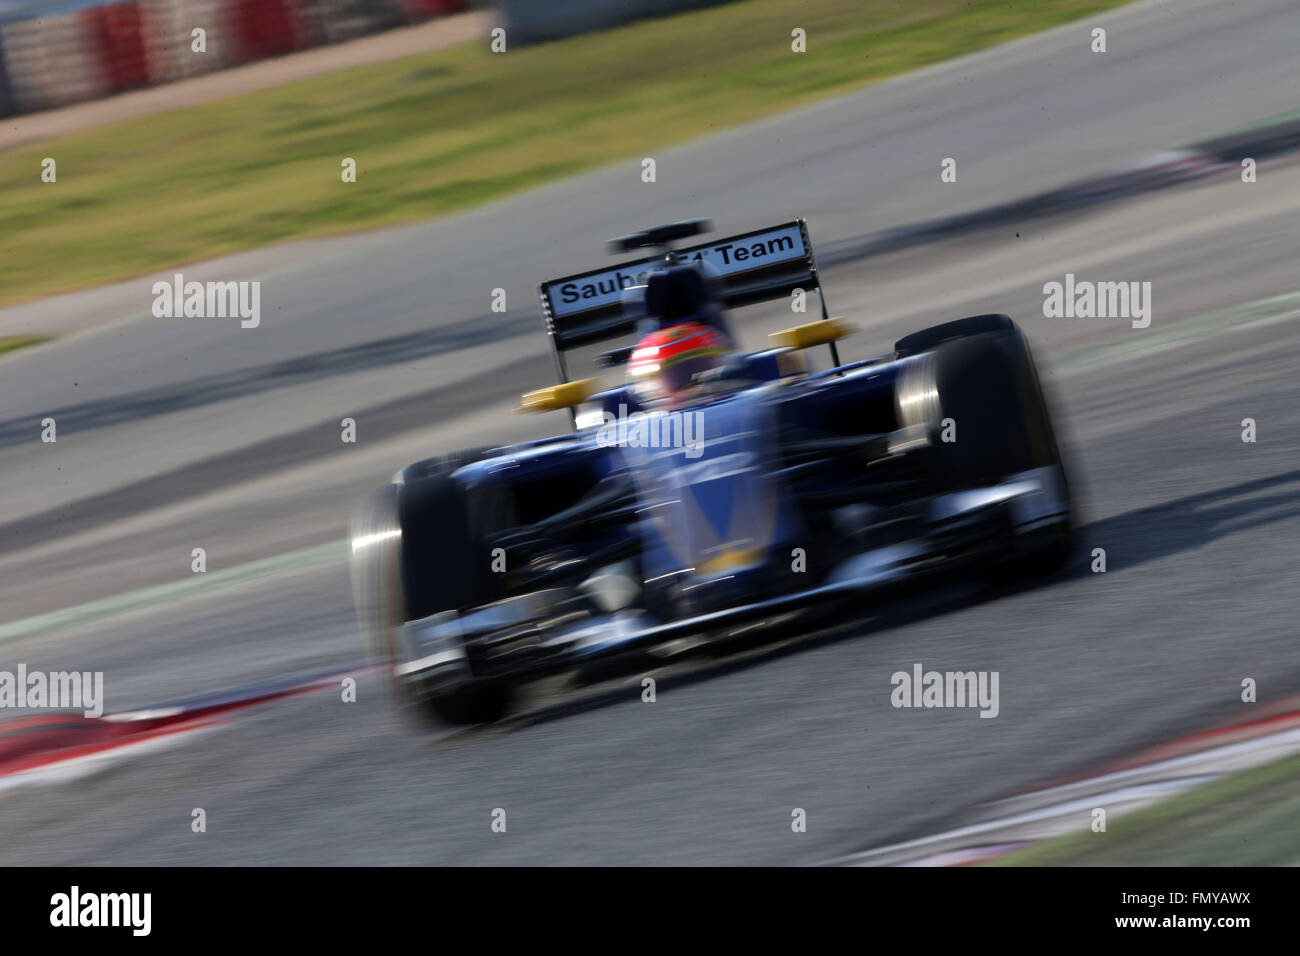 Brazilian Formula One driver Felipe Nasr of Sauber steers his car during the training session for the upcoming Formula One season at the Circuit de Barcelona - Catalunya in Barcelona, Spain, 24 February 2016. Photo: Jens Buettner/dpa Stock Photo